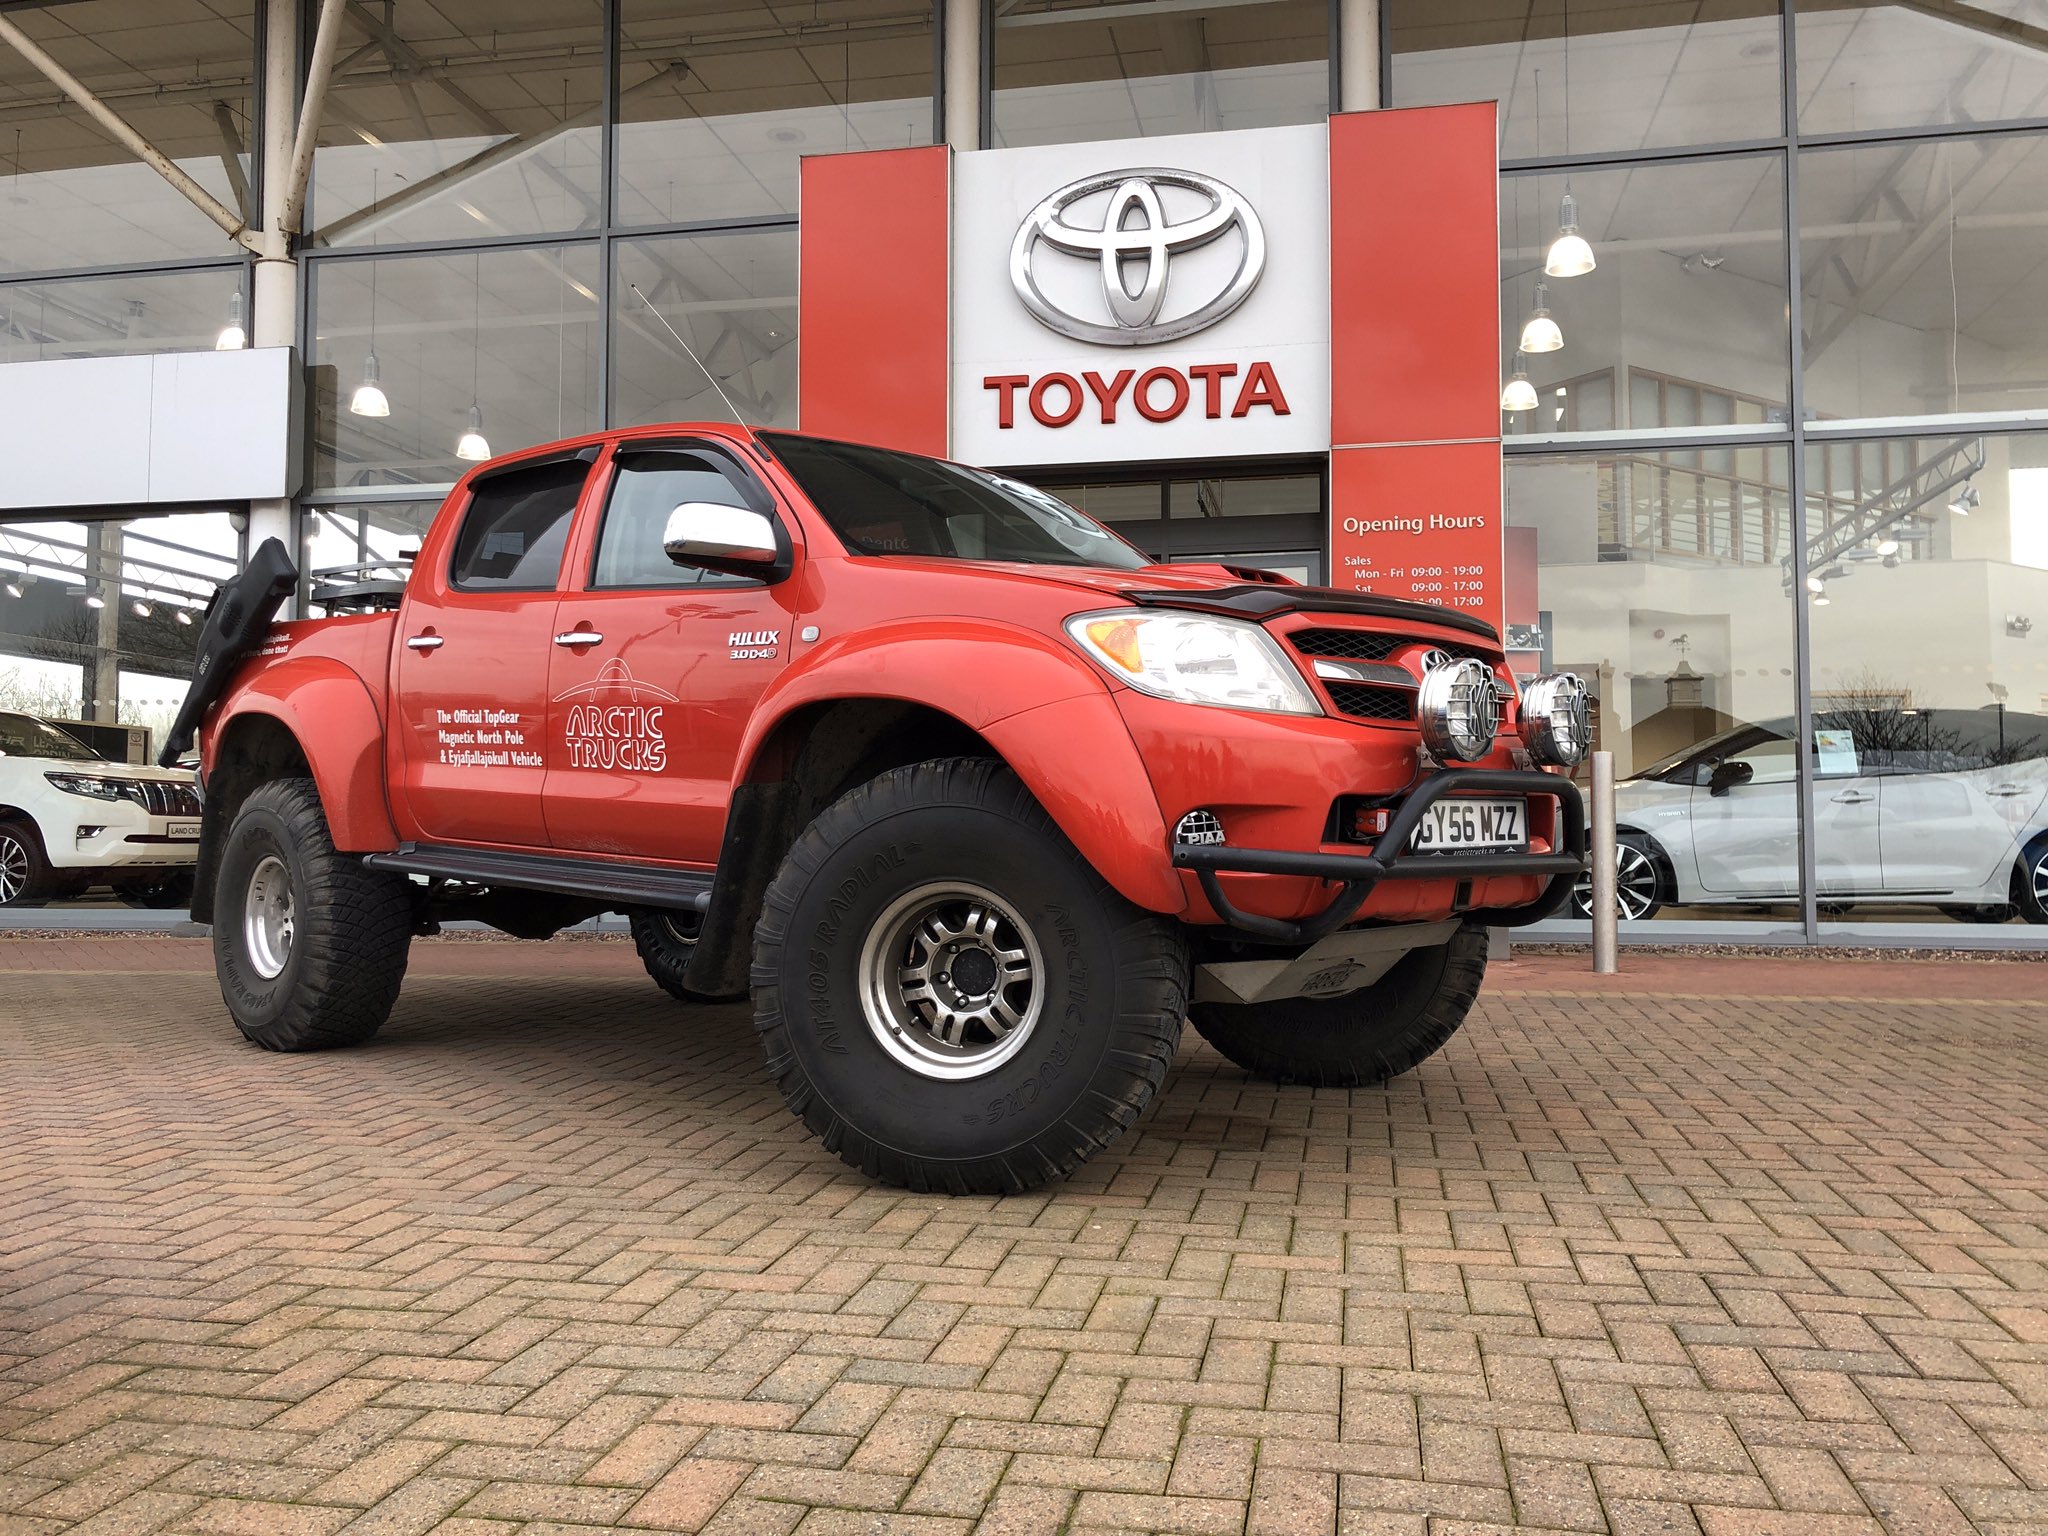 RRG Denton Toyota Twitter: "Look at this beast we had in yesterday, the Top Gear Toyota Hilux This famous beast is from a Top episode in which James May